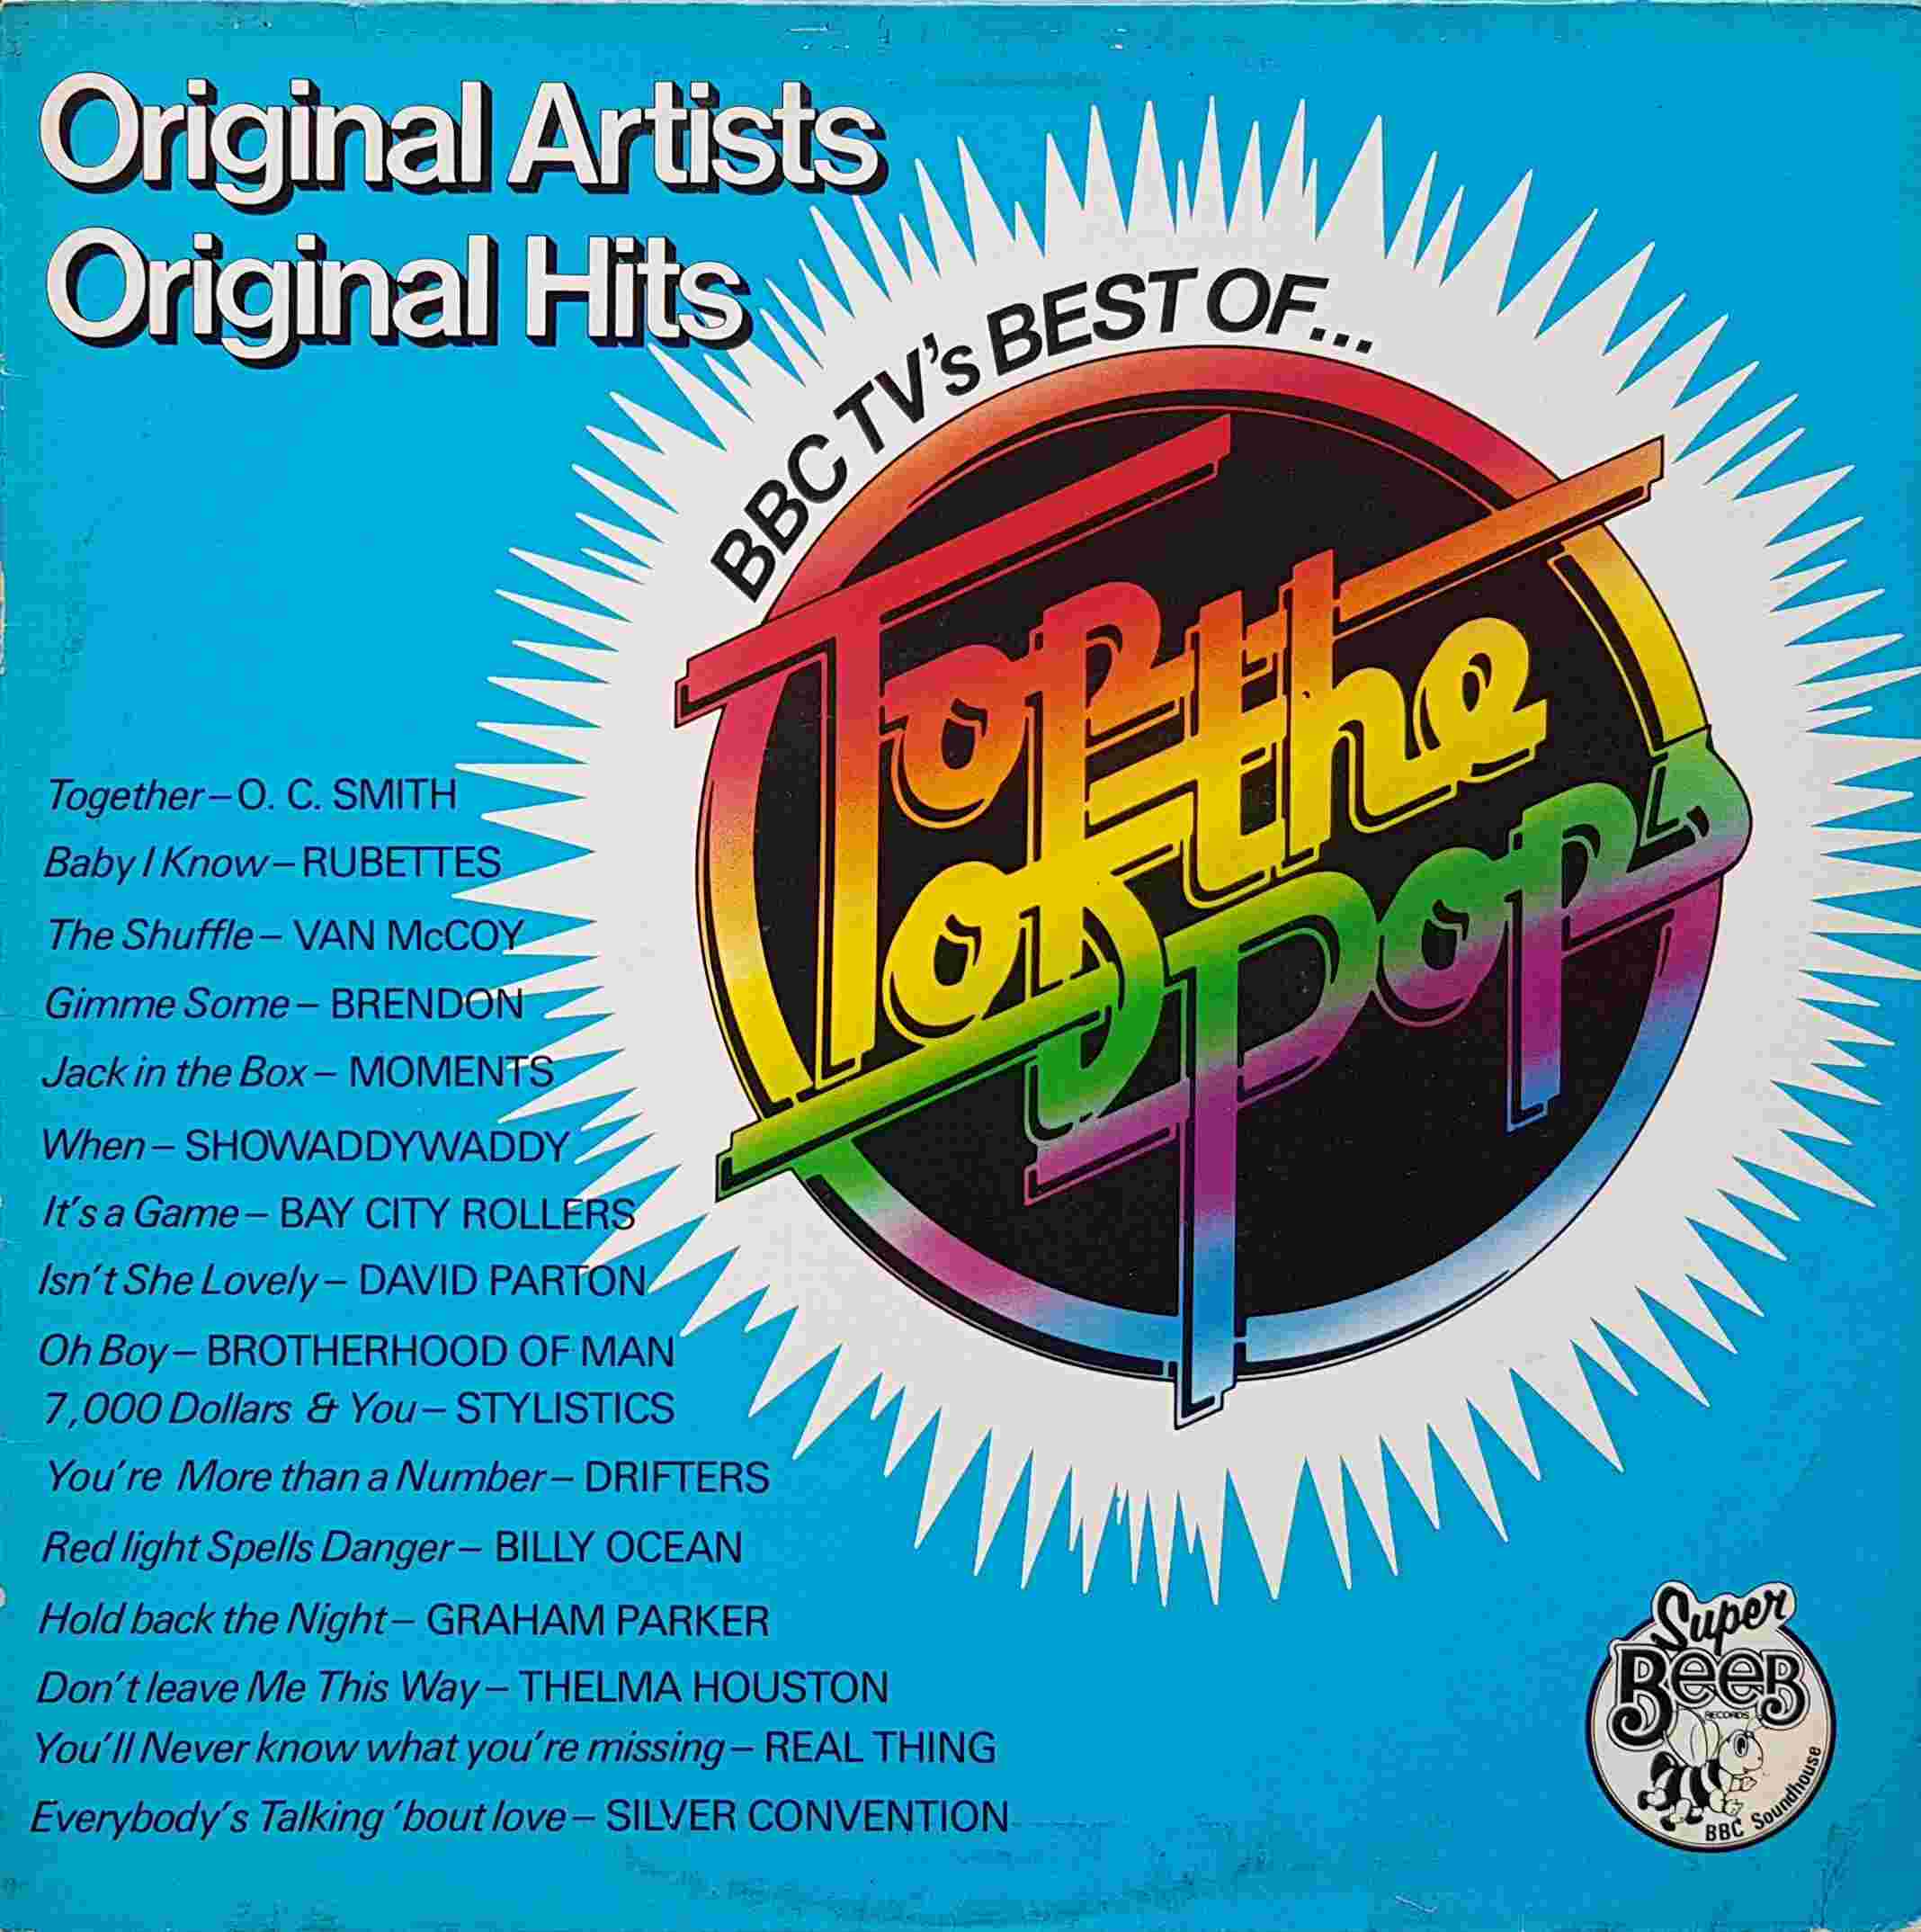 Picture of BBC TV's best of top of the pops - Volume 5 by artist Various from the BBC albums - Records and Tapes library